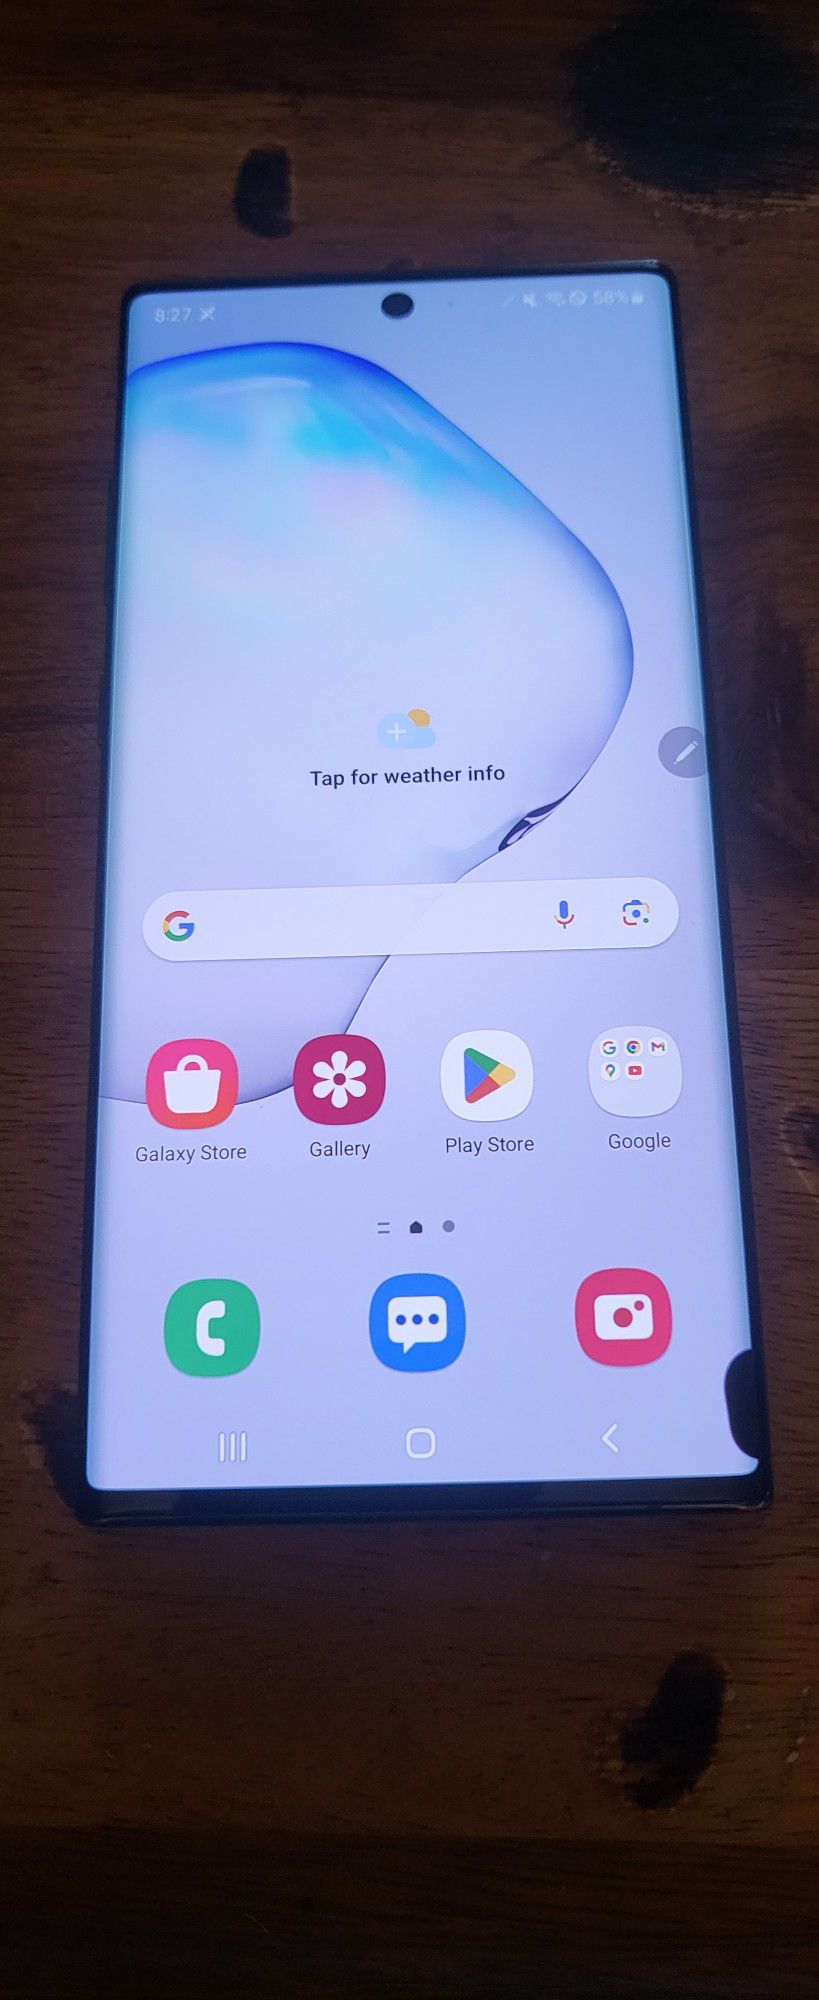 
8) GALAXY NOTE 10+. UNLOCKED. 256GB HARDDRIVE AND 12GB RAM. DARK GRAY. BACKGLASS HAS A tiny CRACK THATS UN-NOTICABLE AND A small BLACK DOT ON BOTTOM 